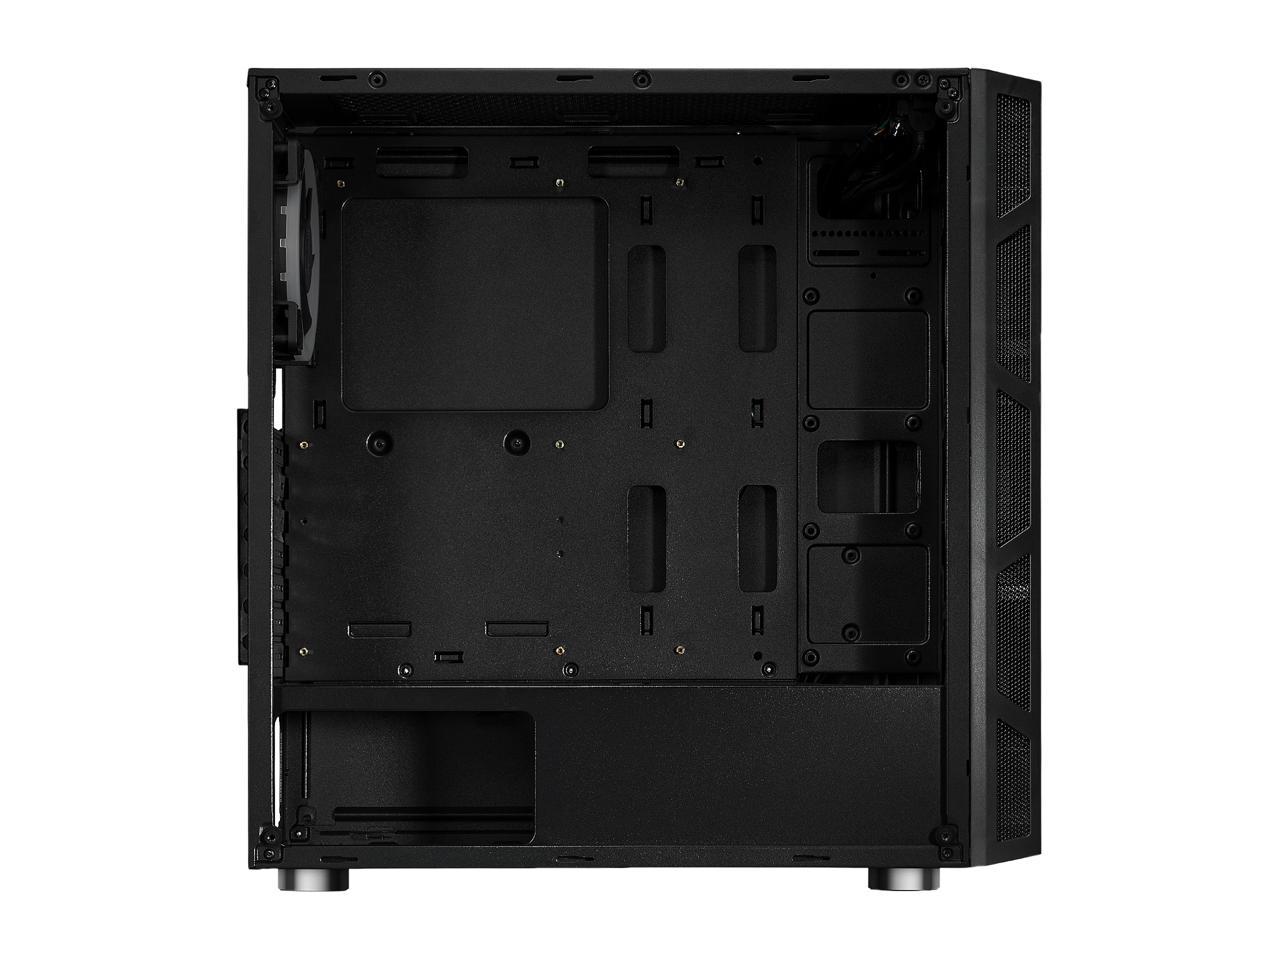 Rosewill SPECTRA C100-A ATX Mid Tower Gaming Case With Tempered Glass Side Panel